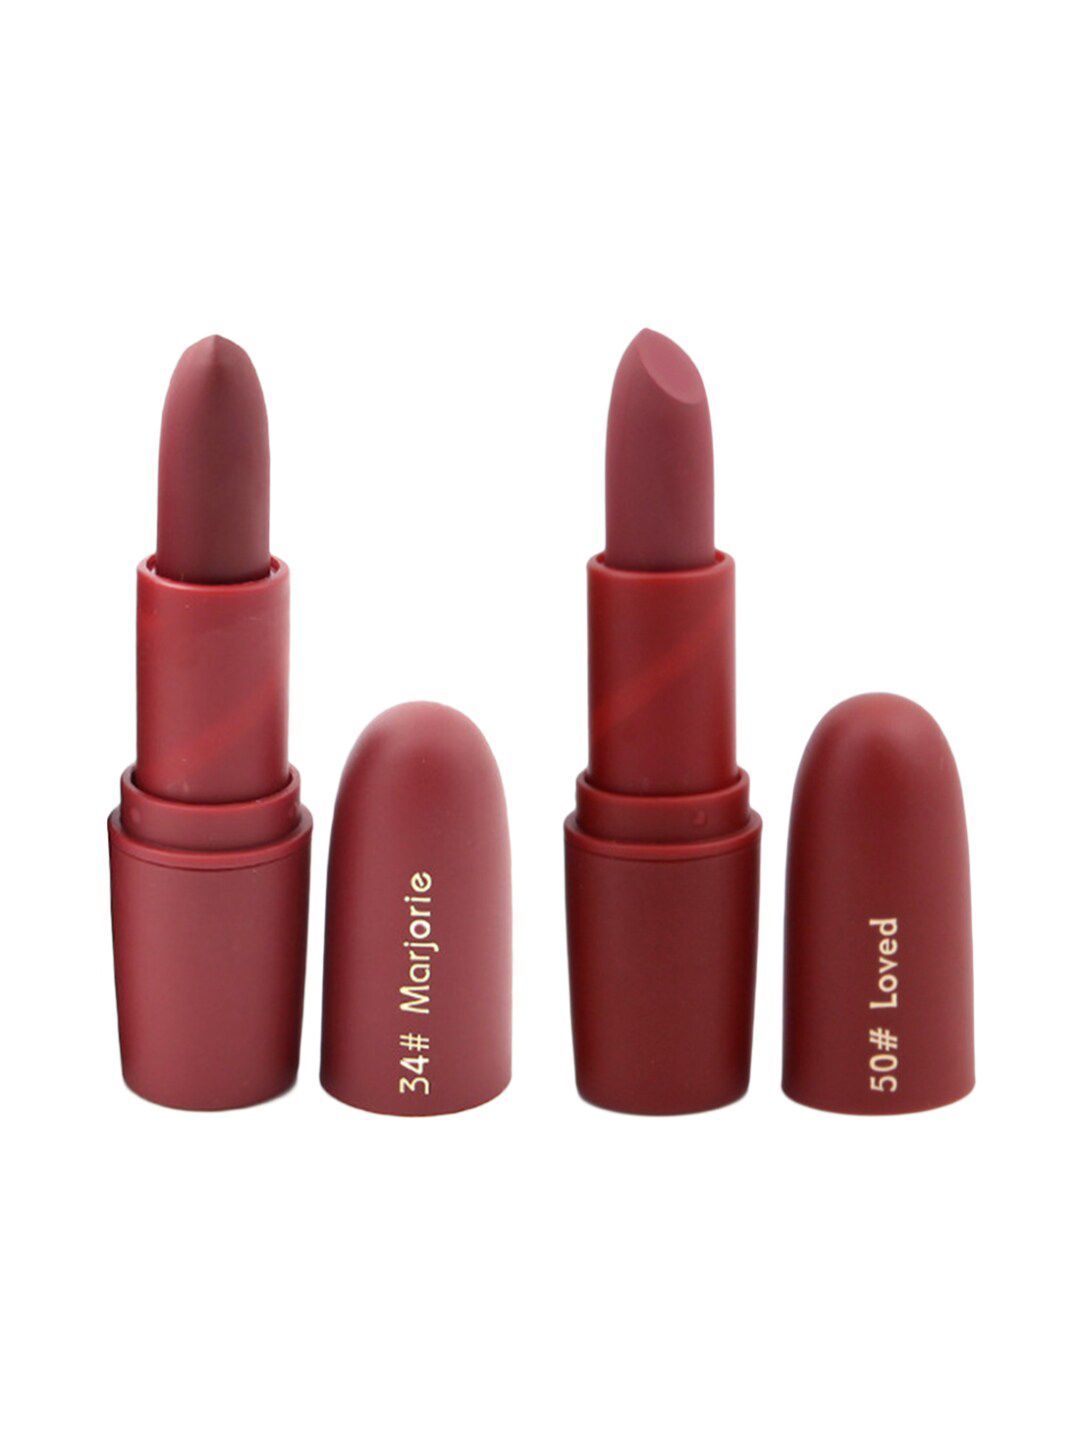 MISS ROSE Professional Make-Up Set of 2 Matte Creamy Lipsticks - Marjorie 34 & Loved 50 Price in India